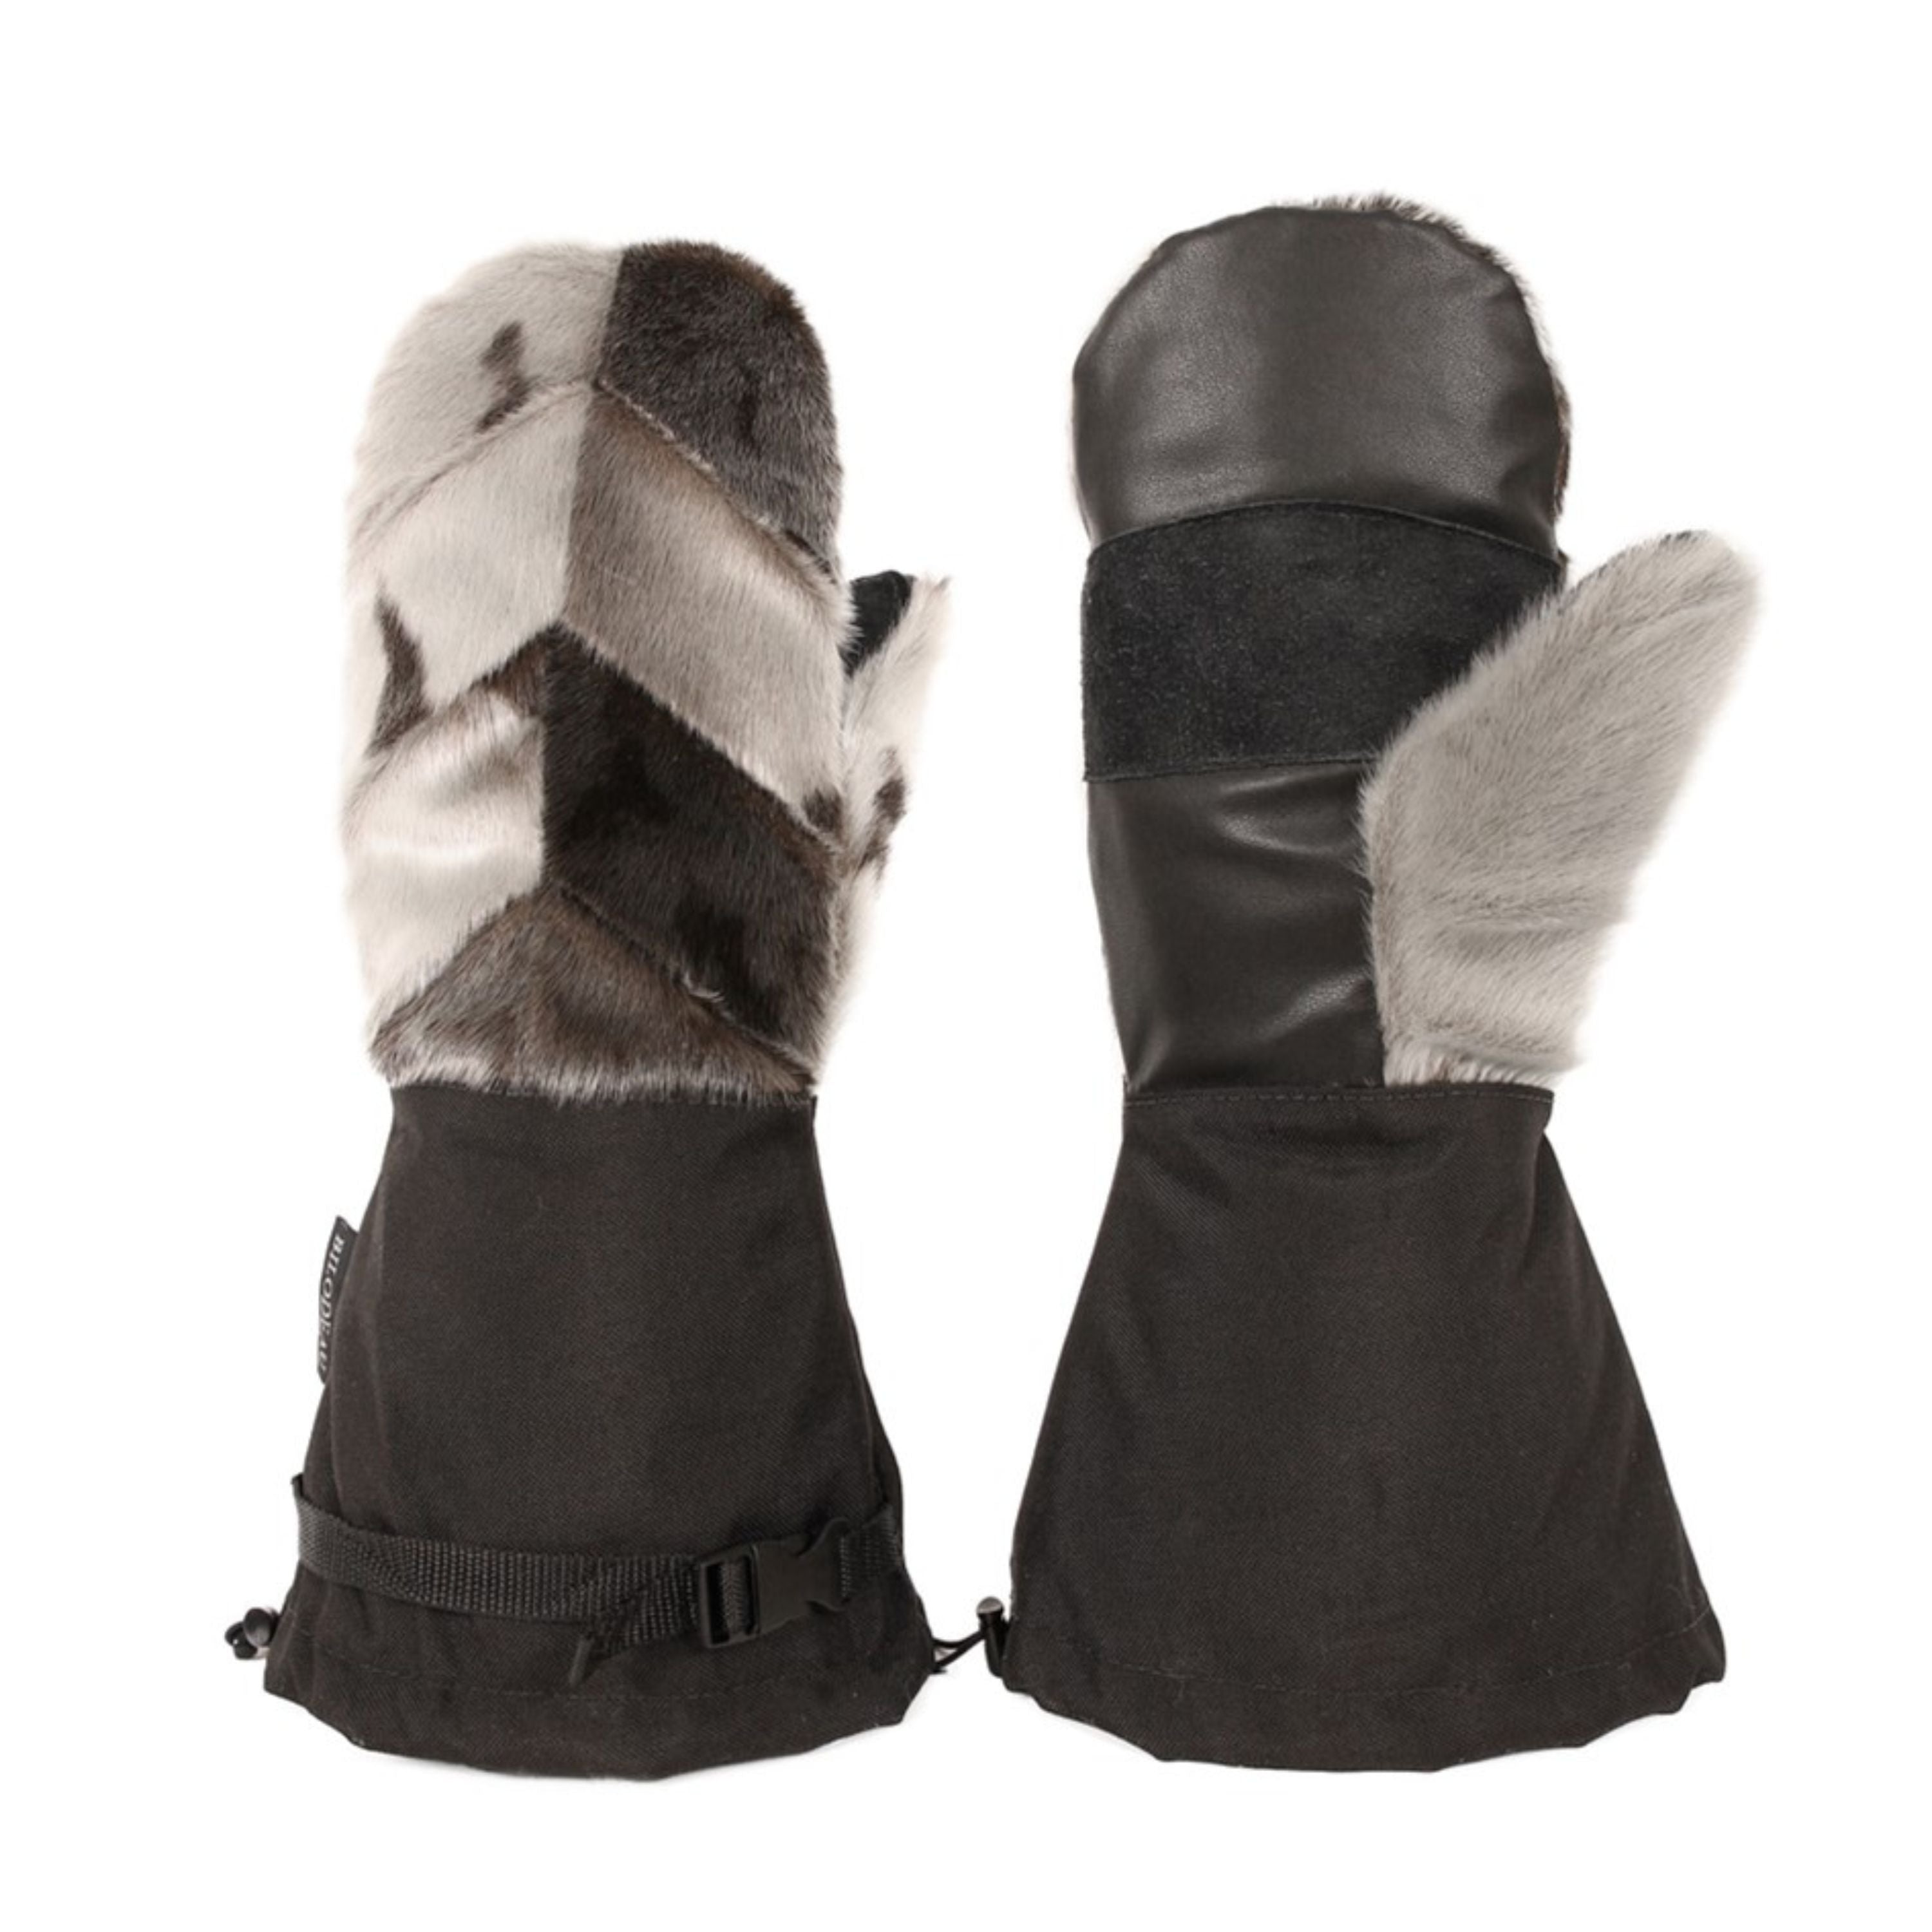 Seal fur expedition mitts - Unisex